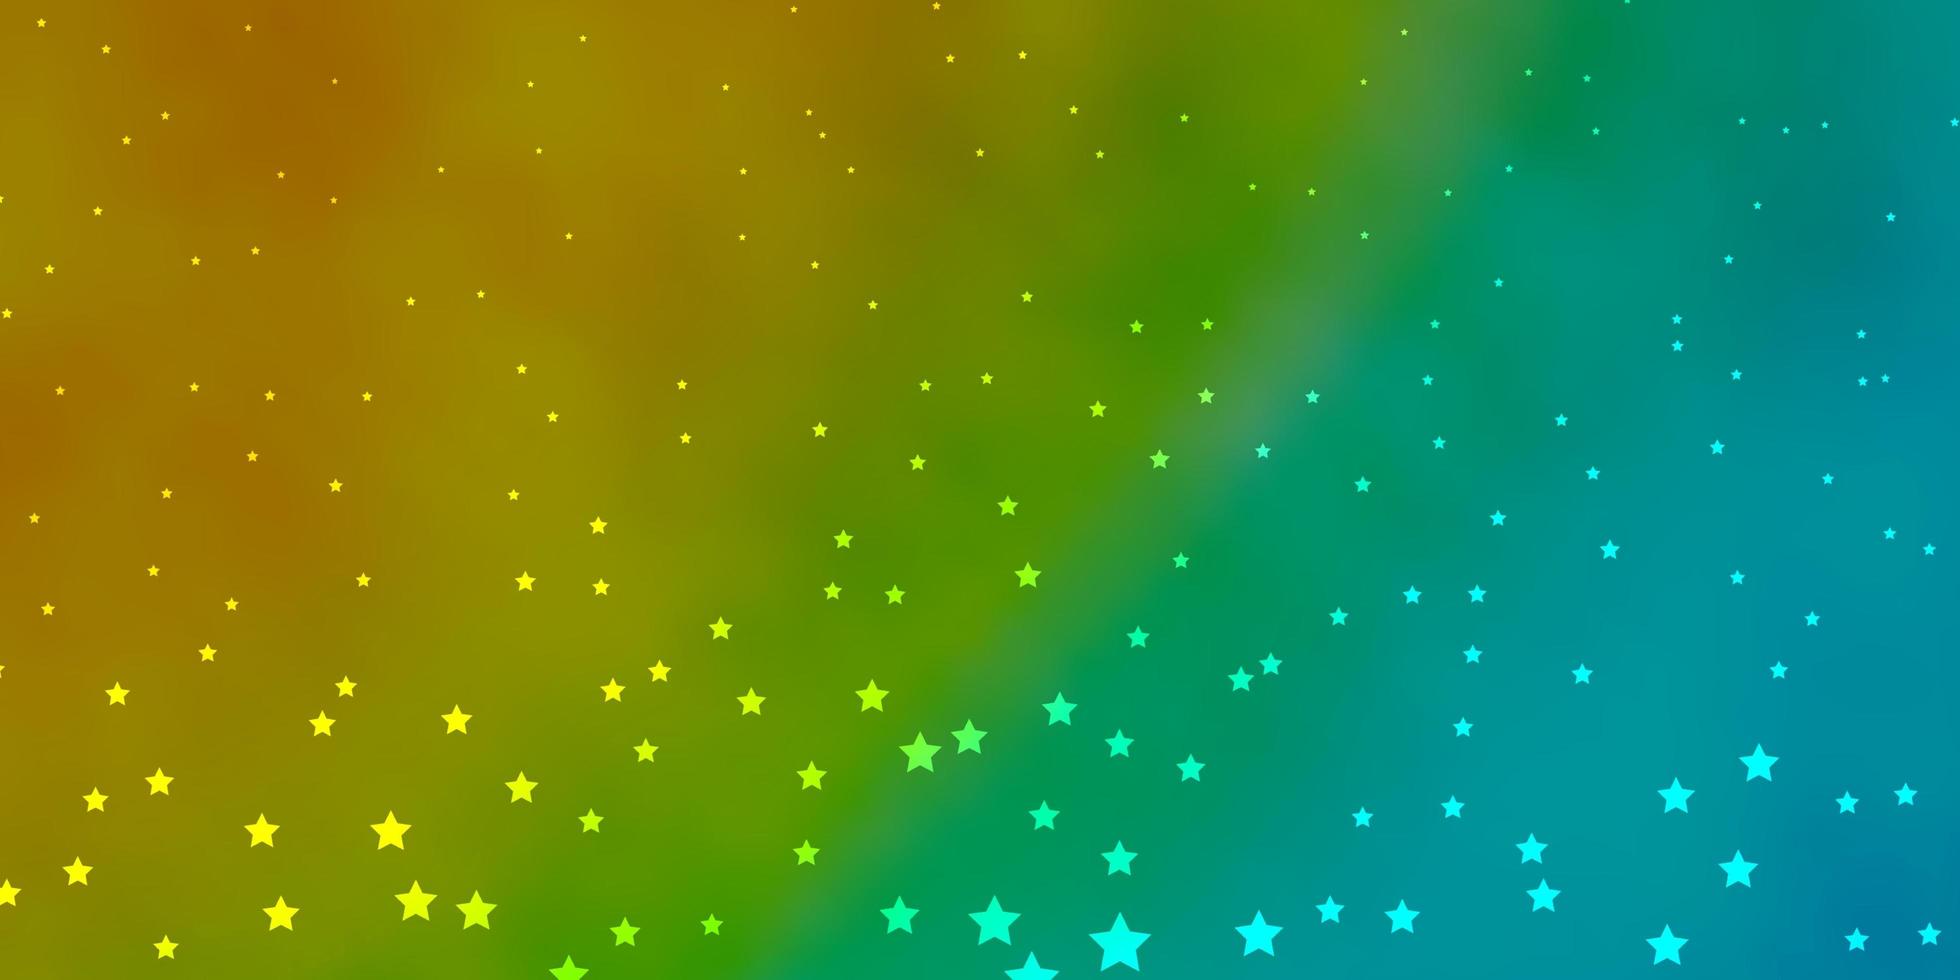 Dark Blue Yellow vector background with colorful stars